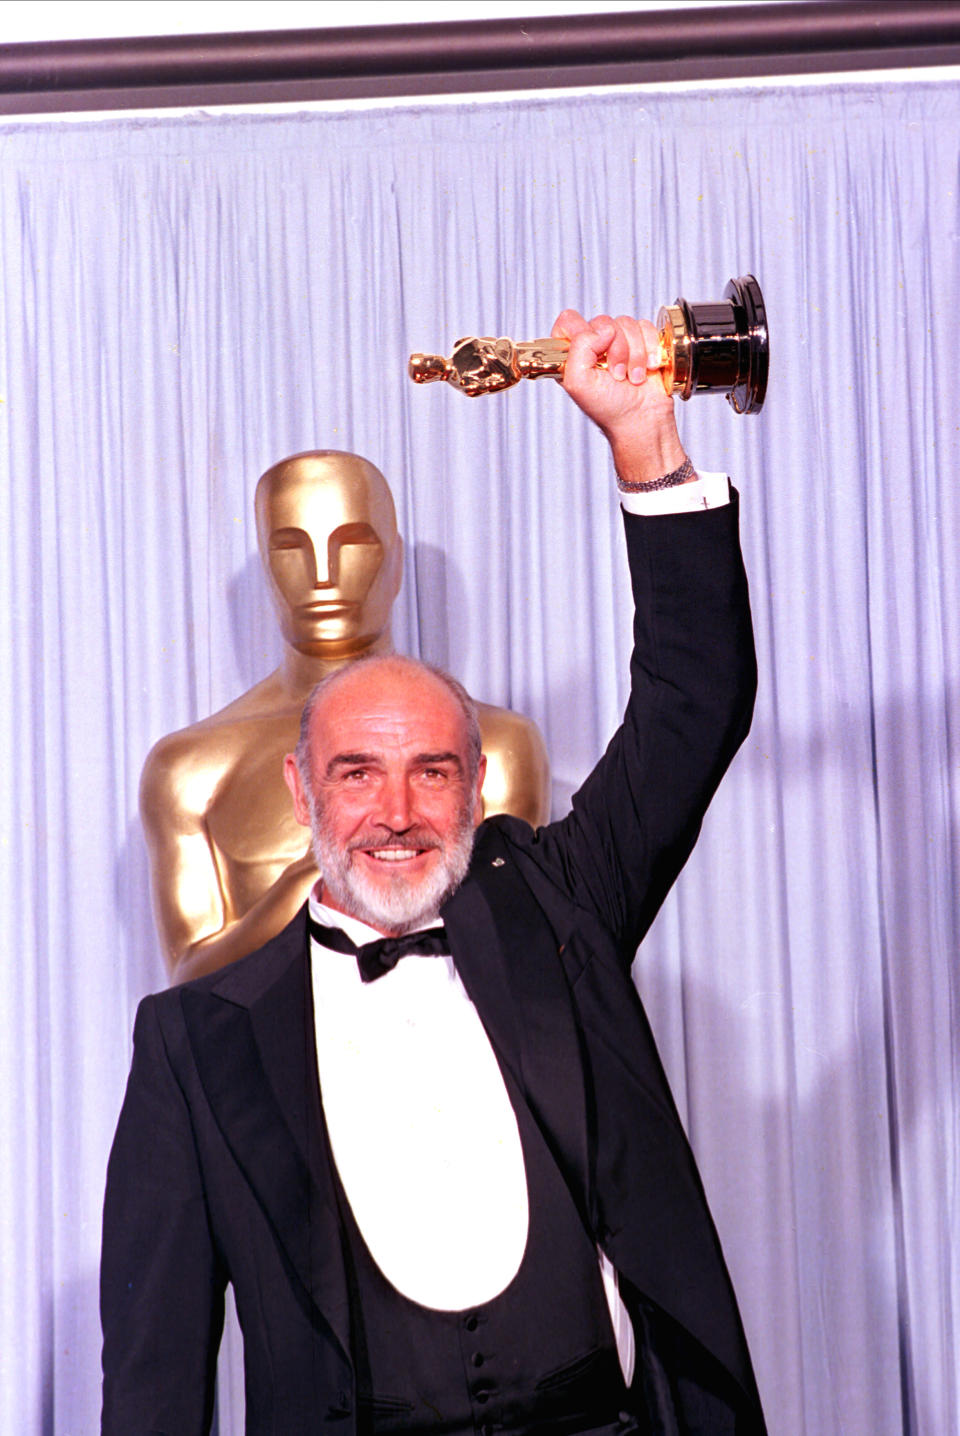 Sean Connery holds his first Oscar at the 60th annual Academy Awards in 1988. Connery won for best supporting actor for his role in "The Untouchables."